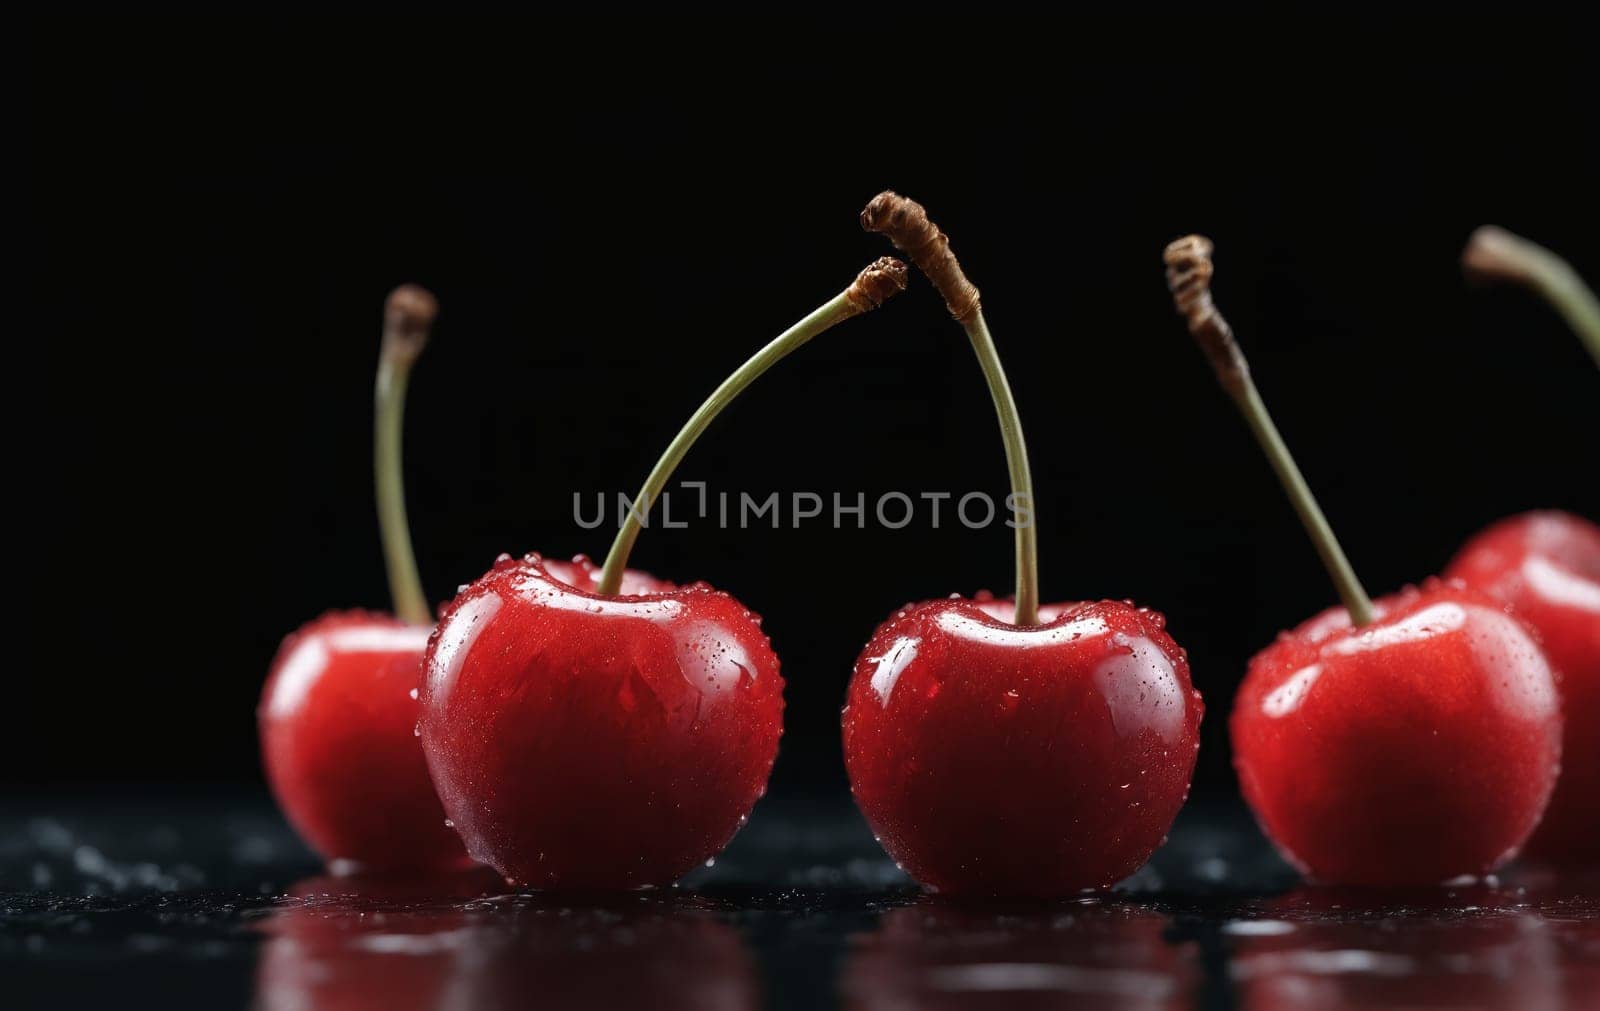 A row of juicy cherries, a seedless fruit, displayed on a sleek black surface by Andre1ns